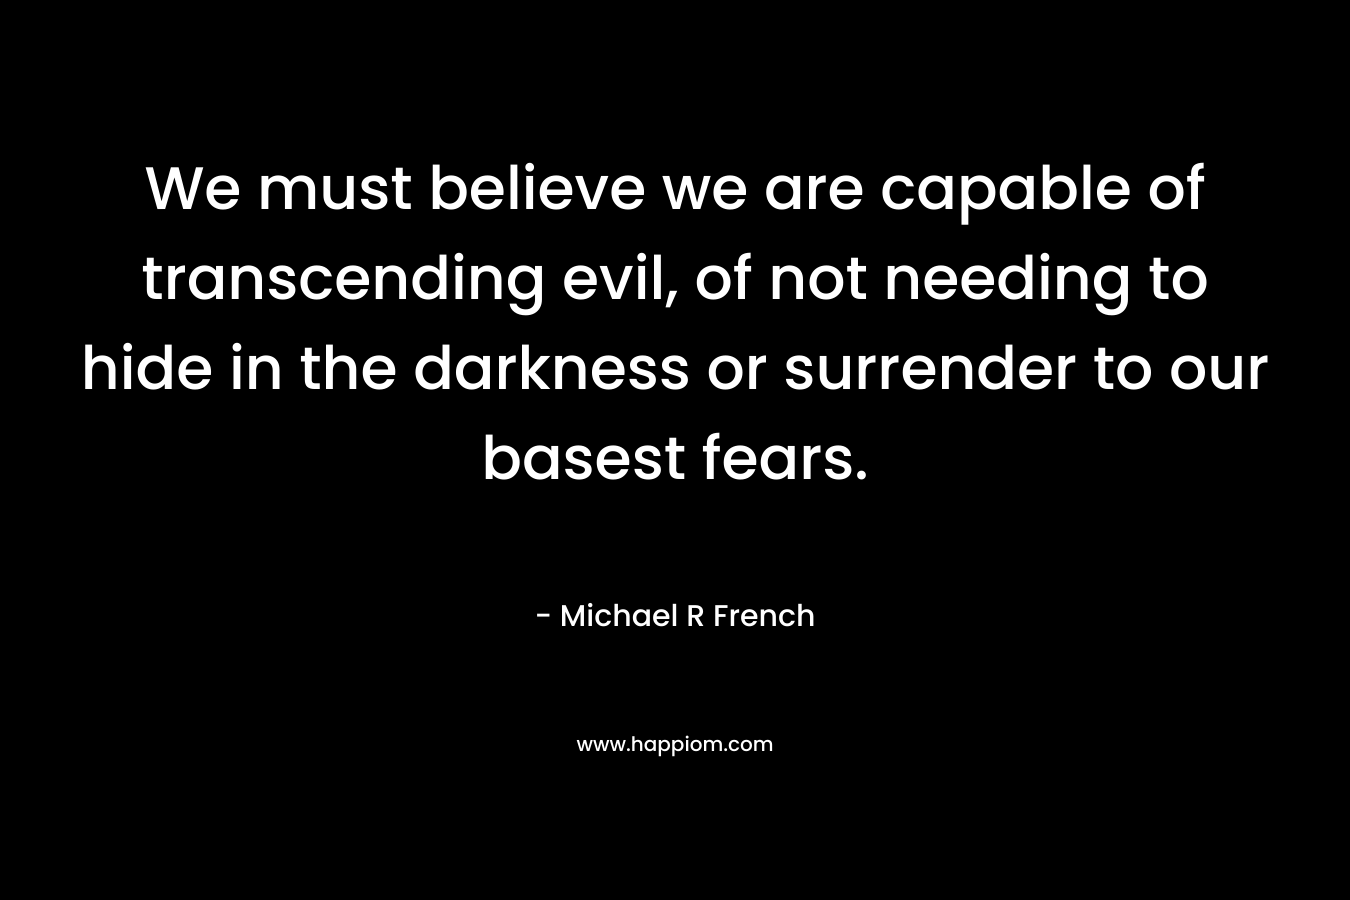 We must believe we are capable of transcending evil, of not needing to hide in the darkness or surrender to our basest fears. – Michael R French